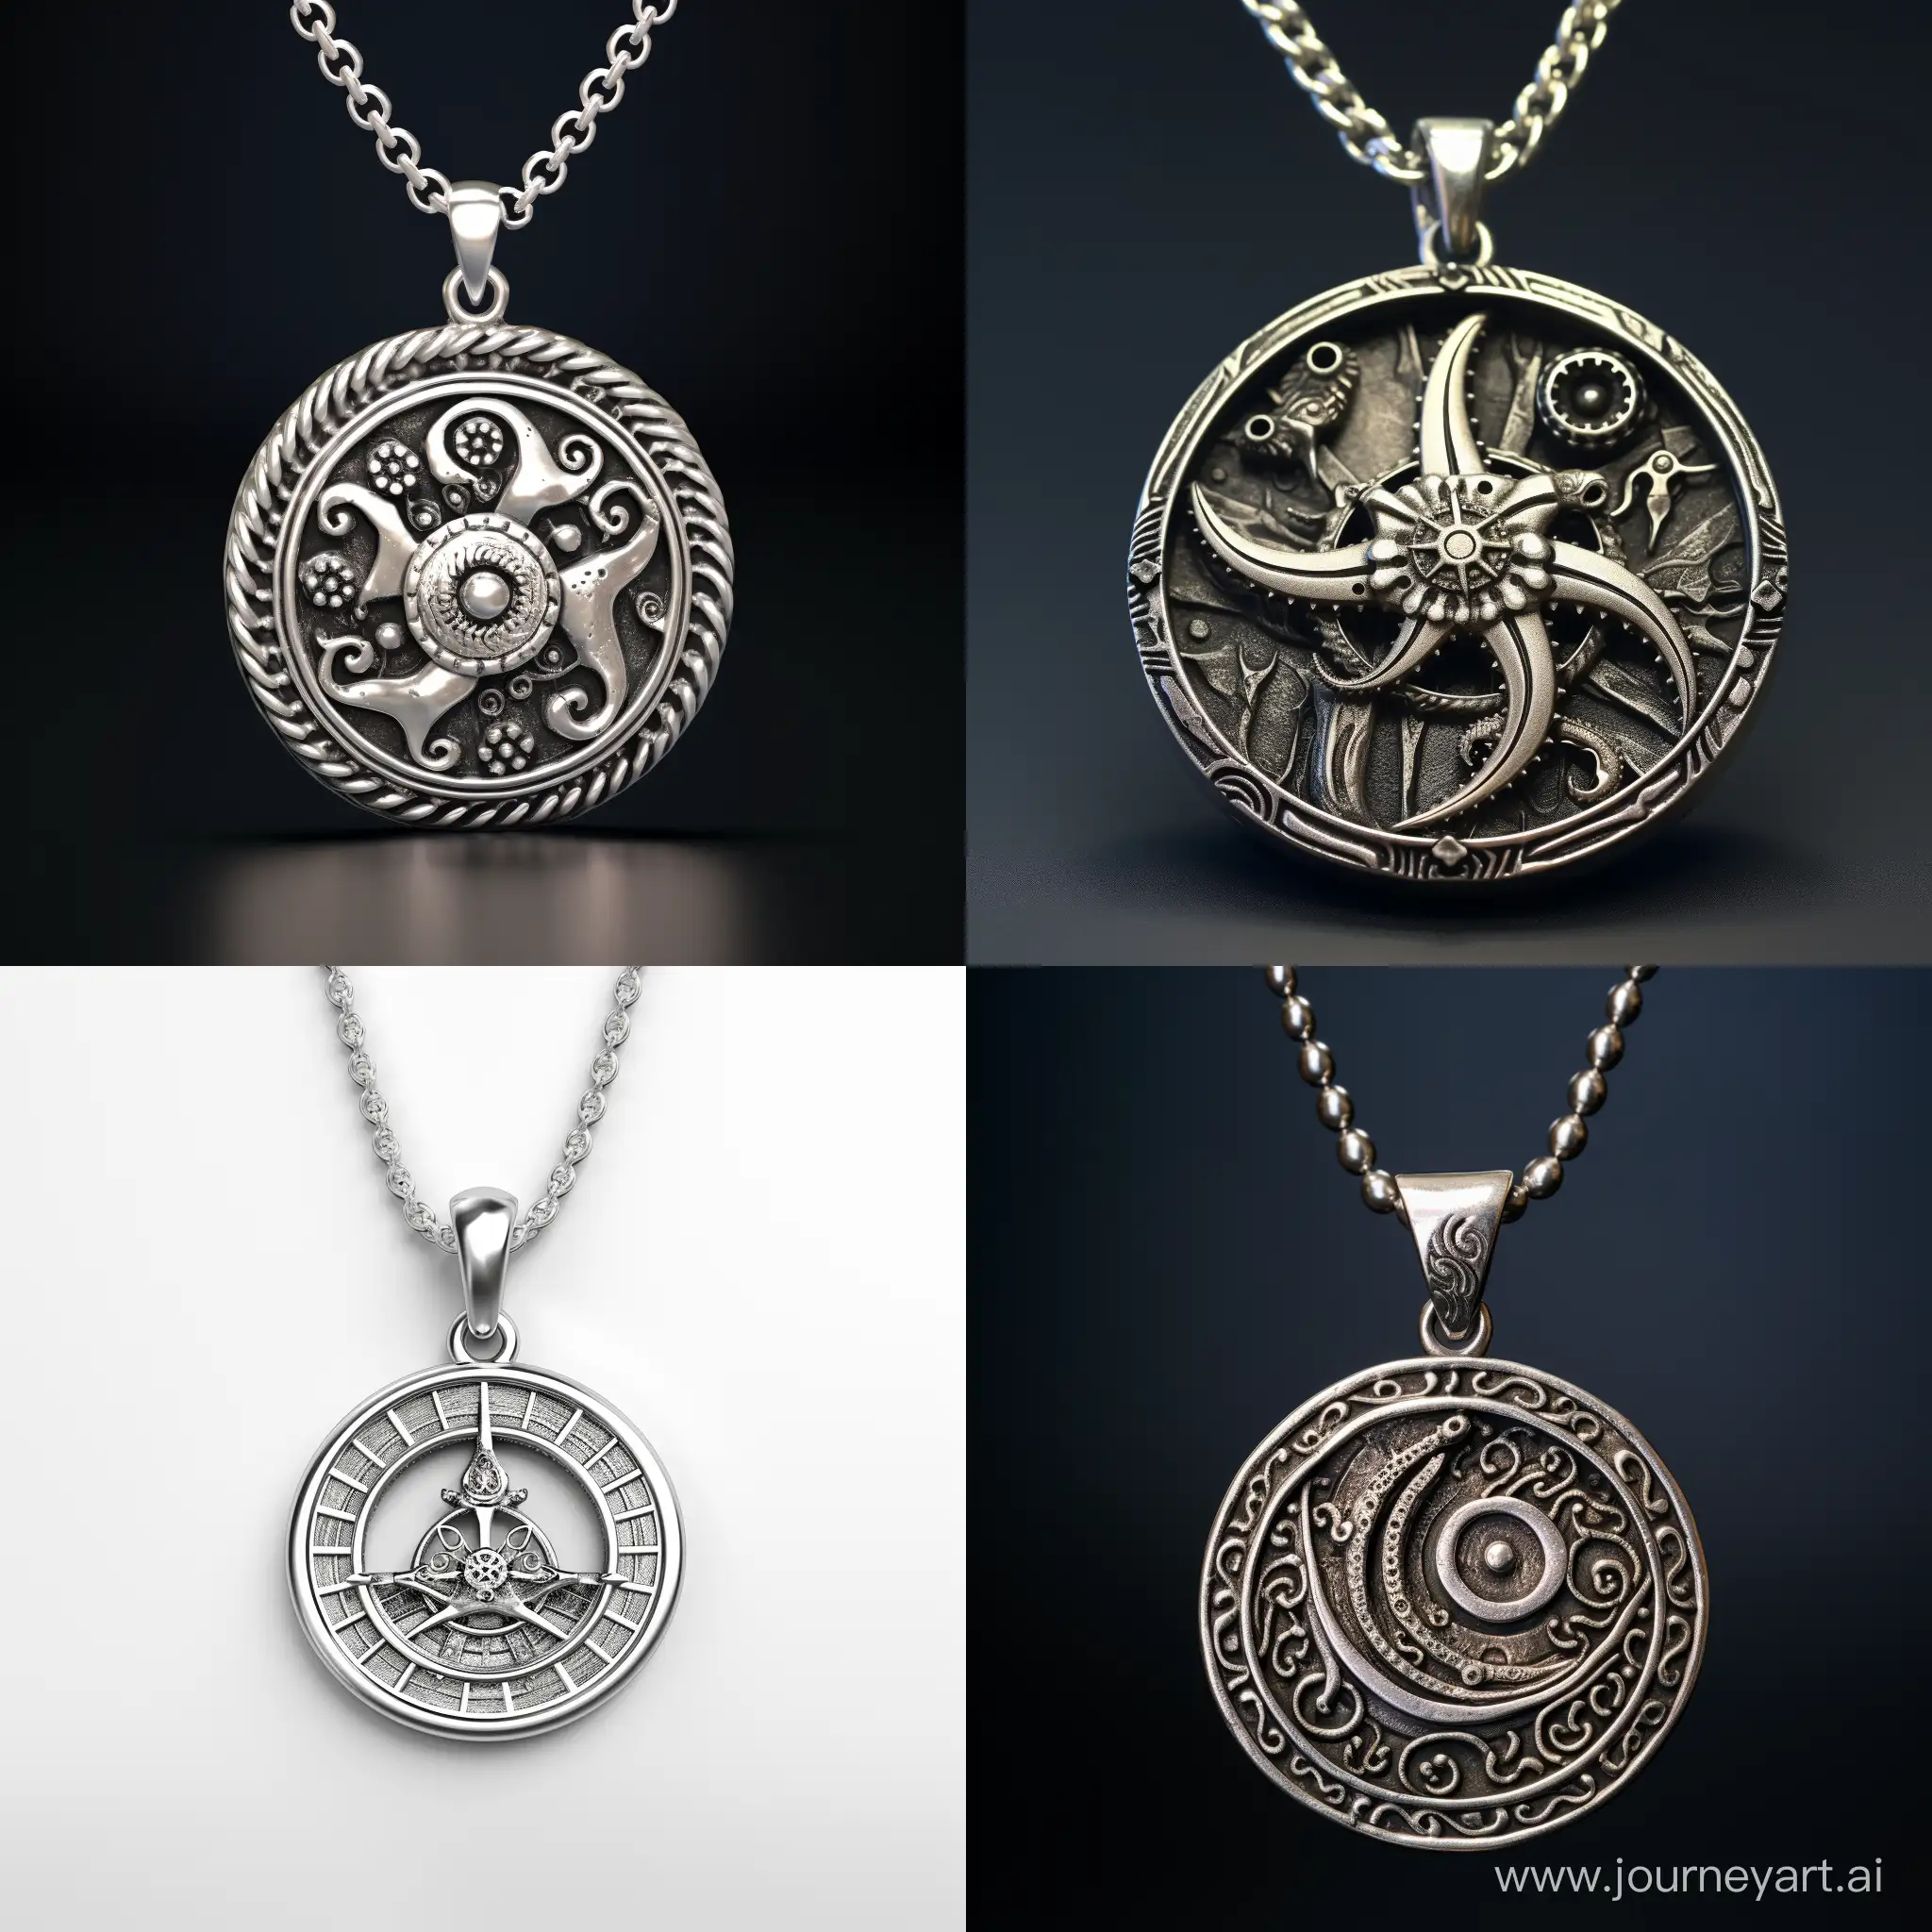 The image of a round silver pendant in the form of a wheel. 
In the middle of the pendant is a hand with fire in the middle. The wheel is decorated with octopus tentacles.